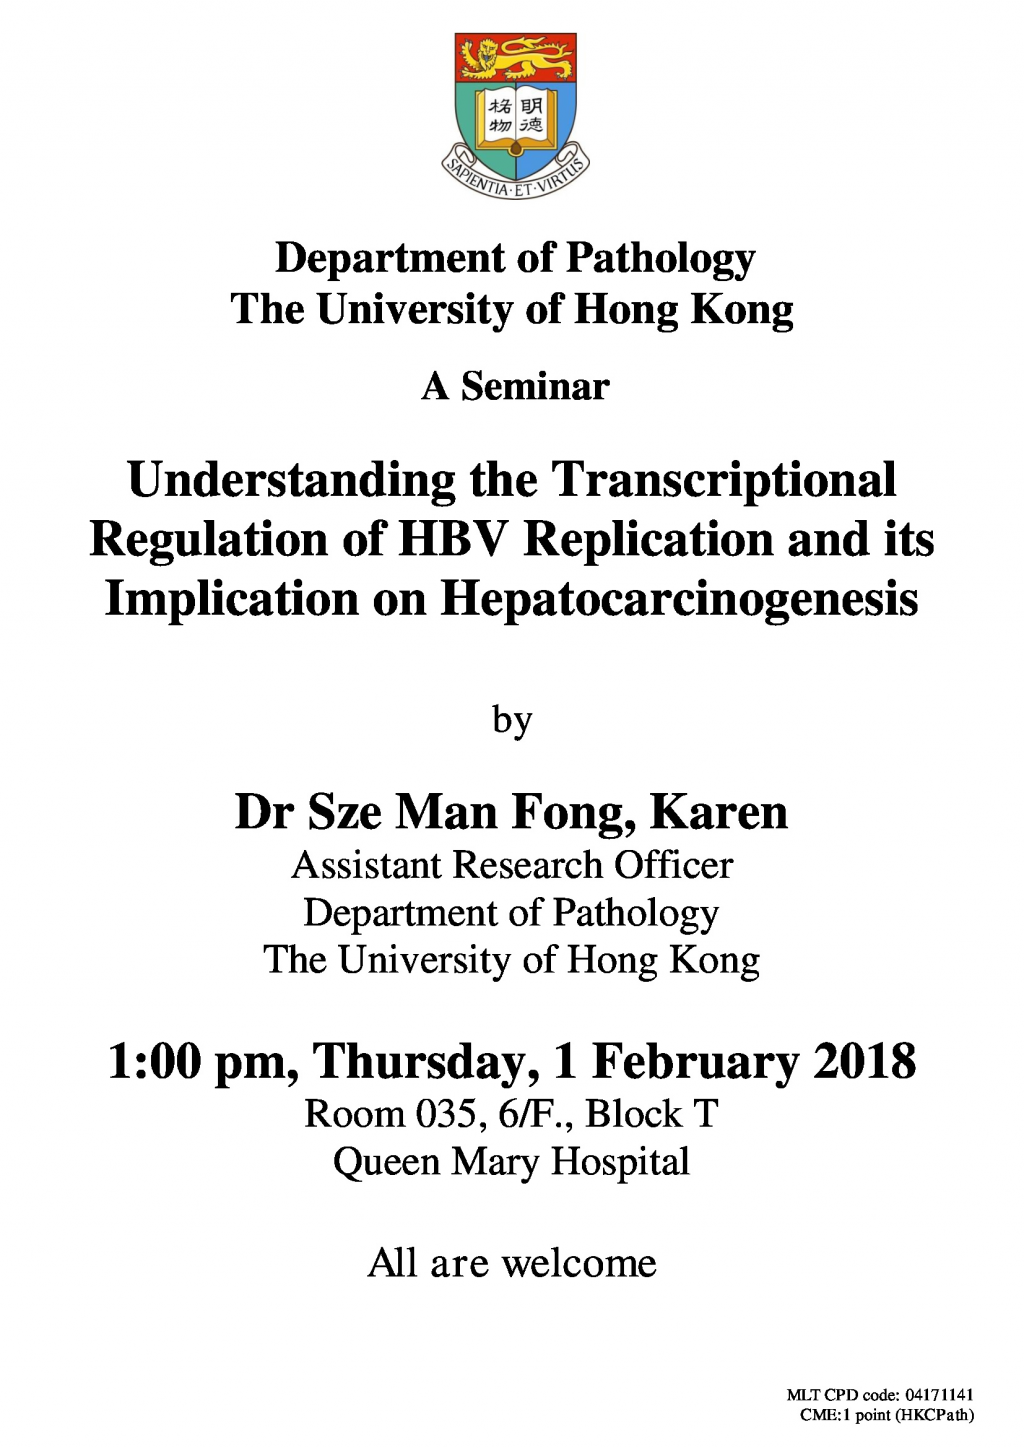 A Seminar on Understanding the Transcriptional Regulation of HBV Replication and its Implication by Dr Karen Sze on 1 Feb (1 pm)